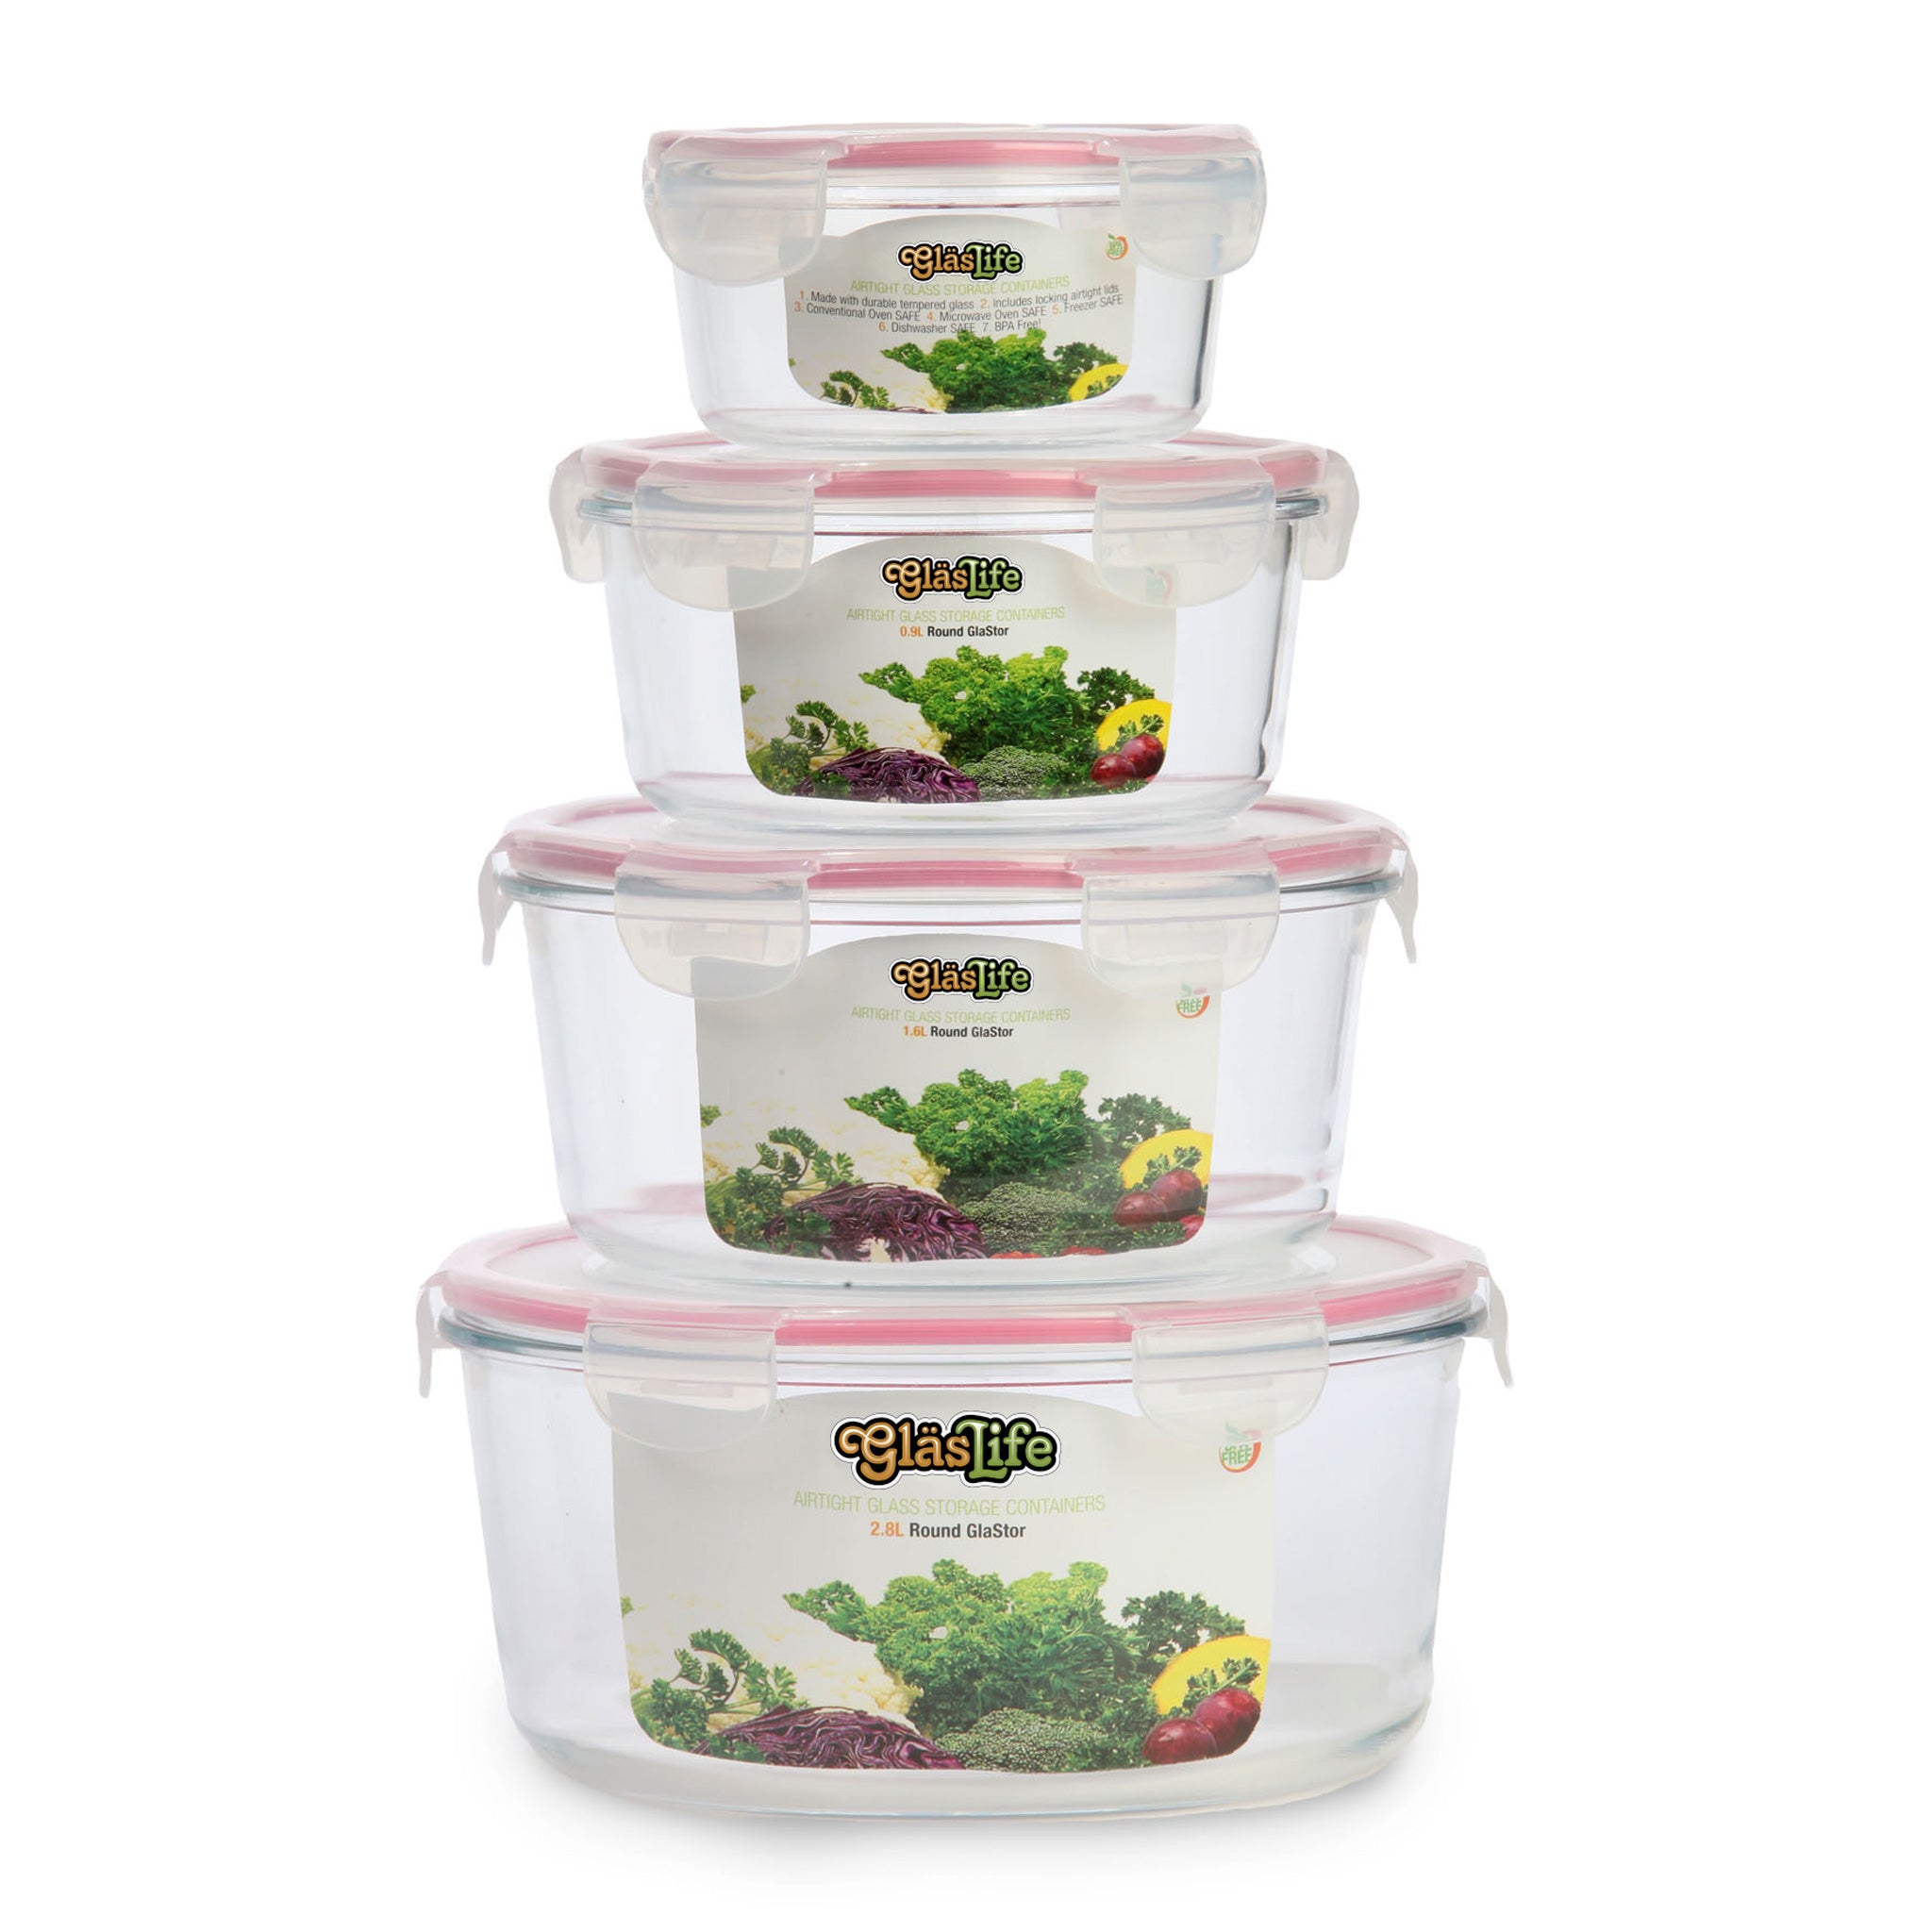 Oven Safe Glass Food Storage Container Set with Plastic Lids - 4